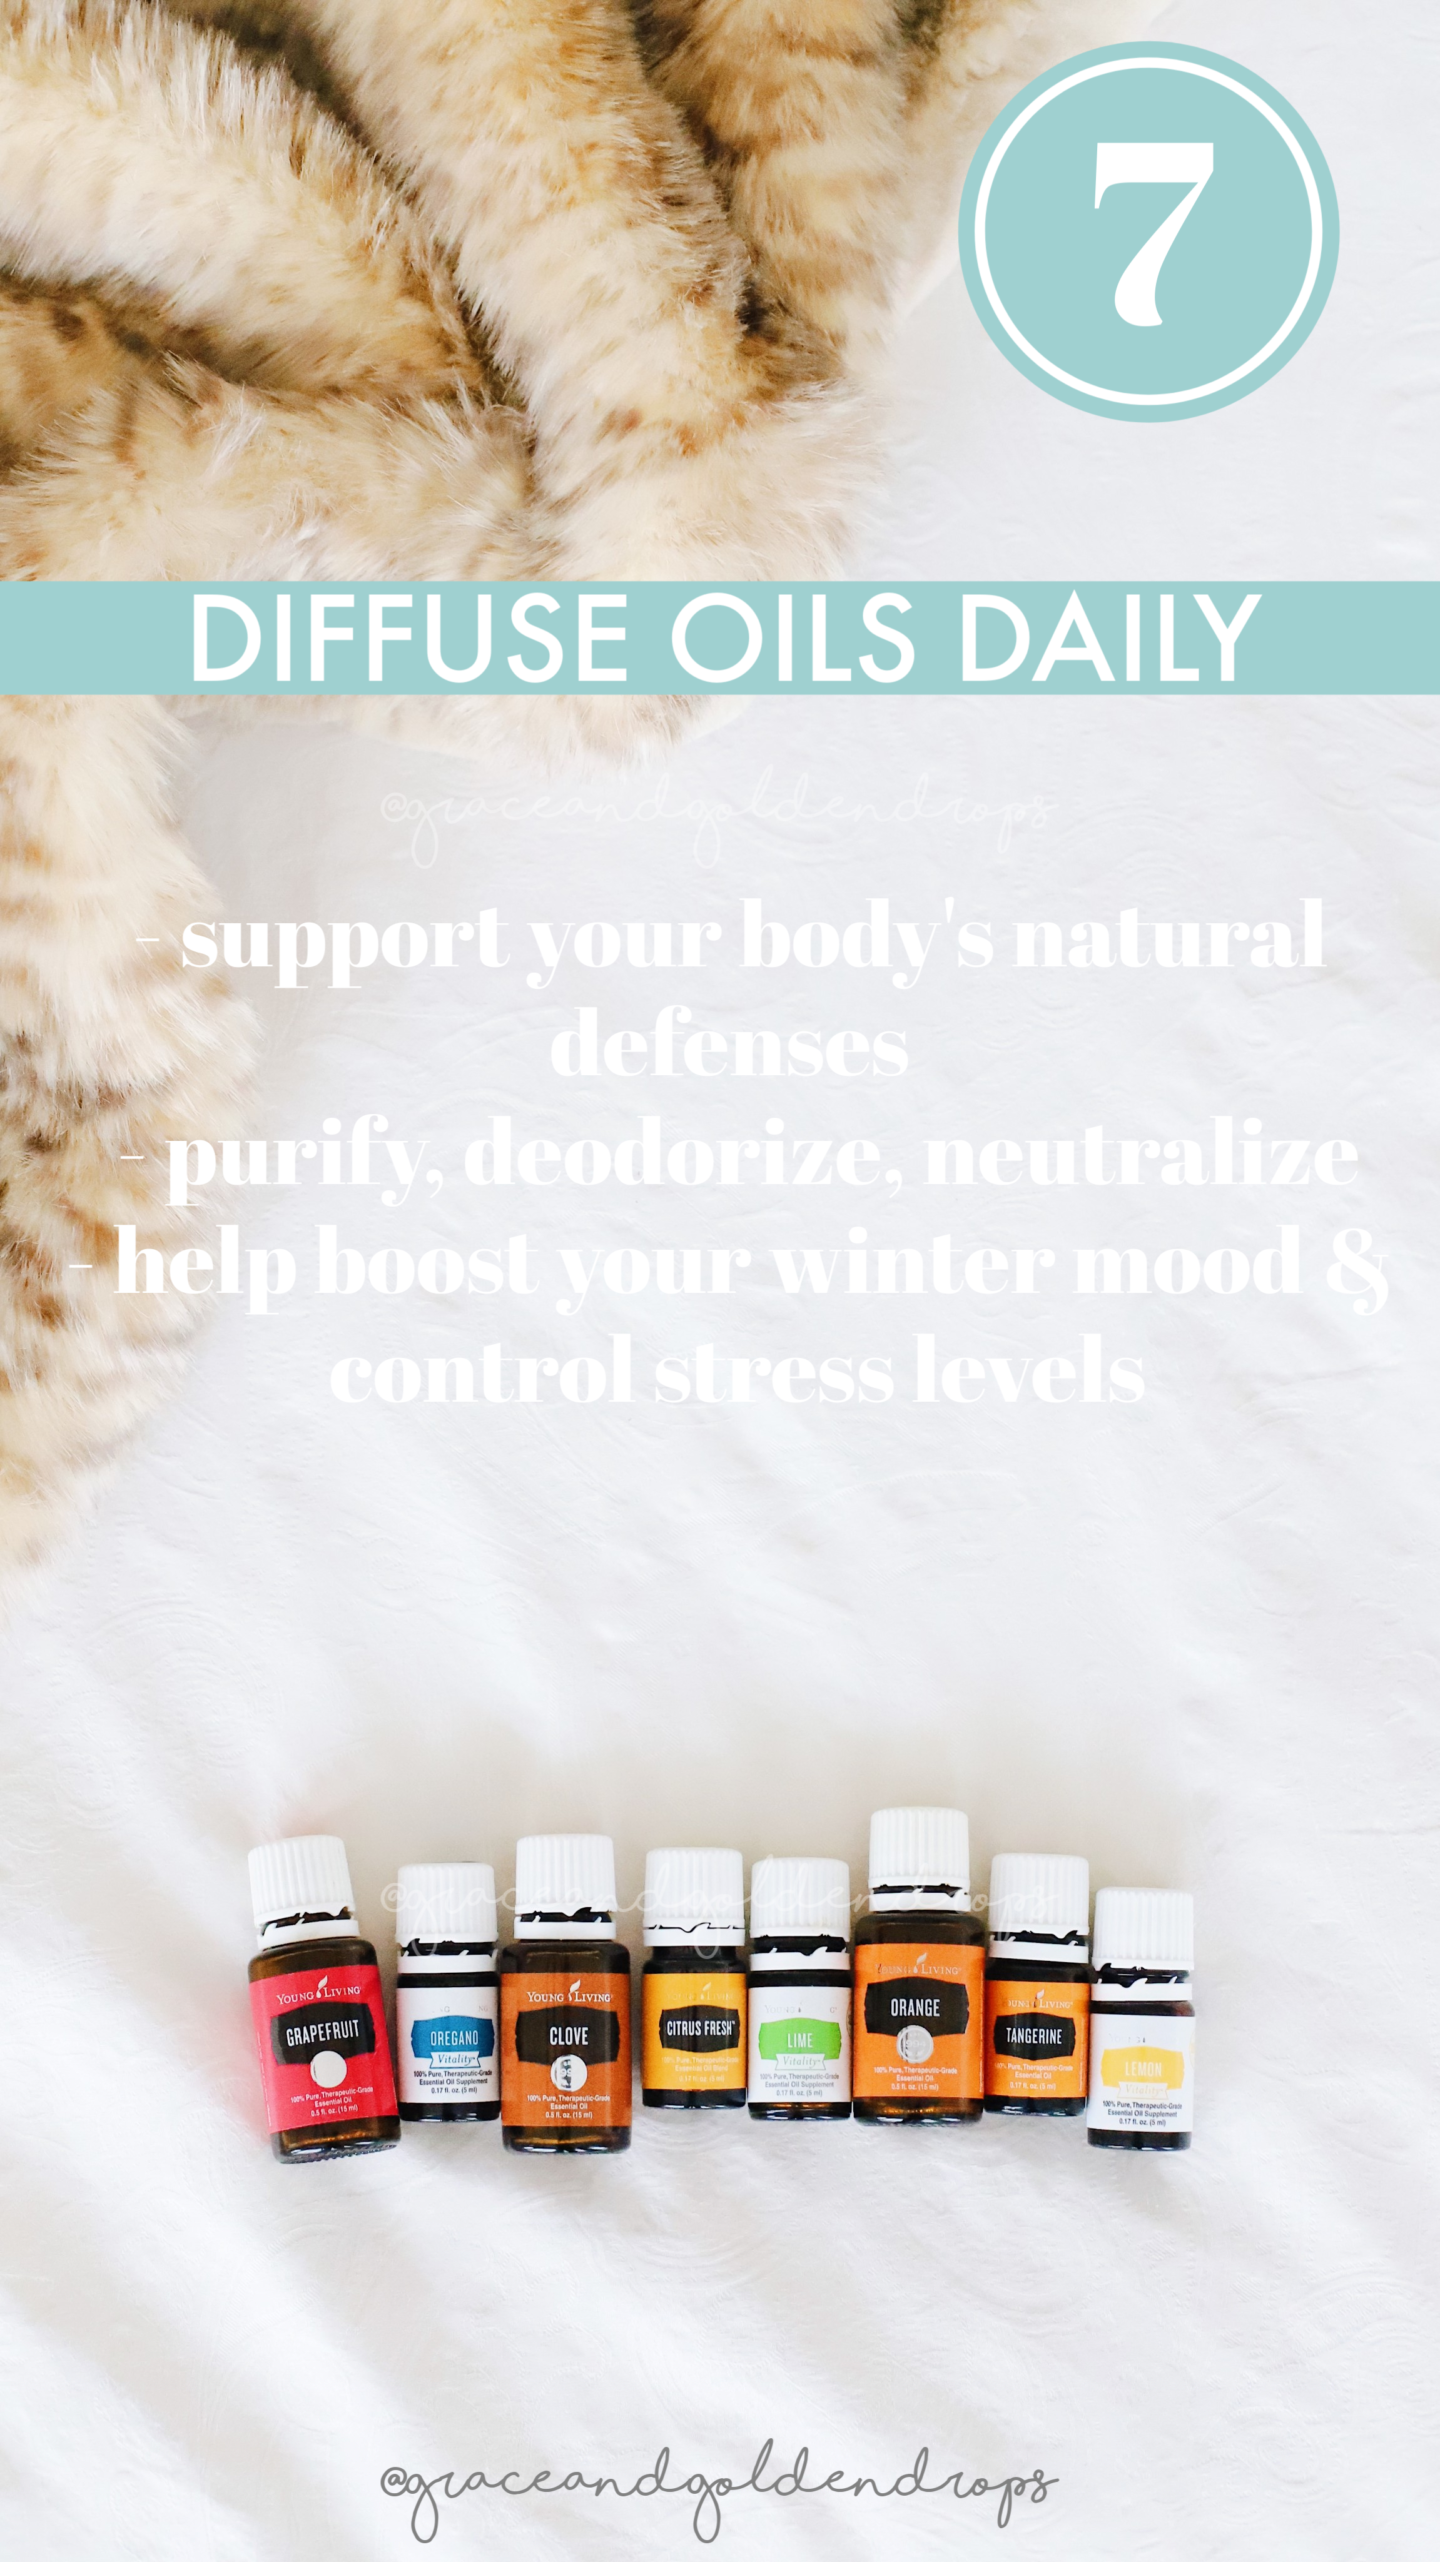 How we can survive and thrive this winter with natural remedies using essential oils and all natural products! Best oils to diffuse this winter.